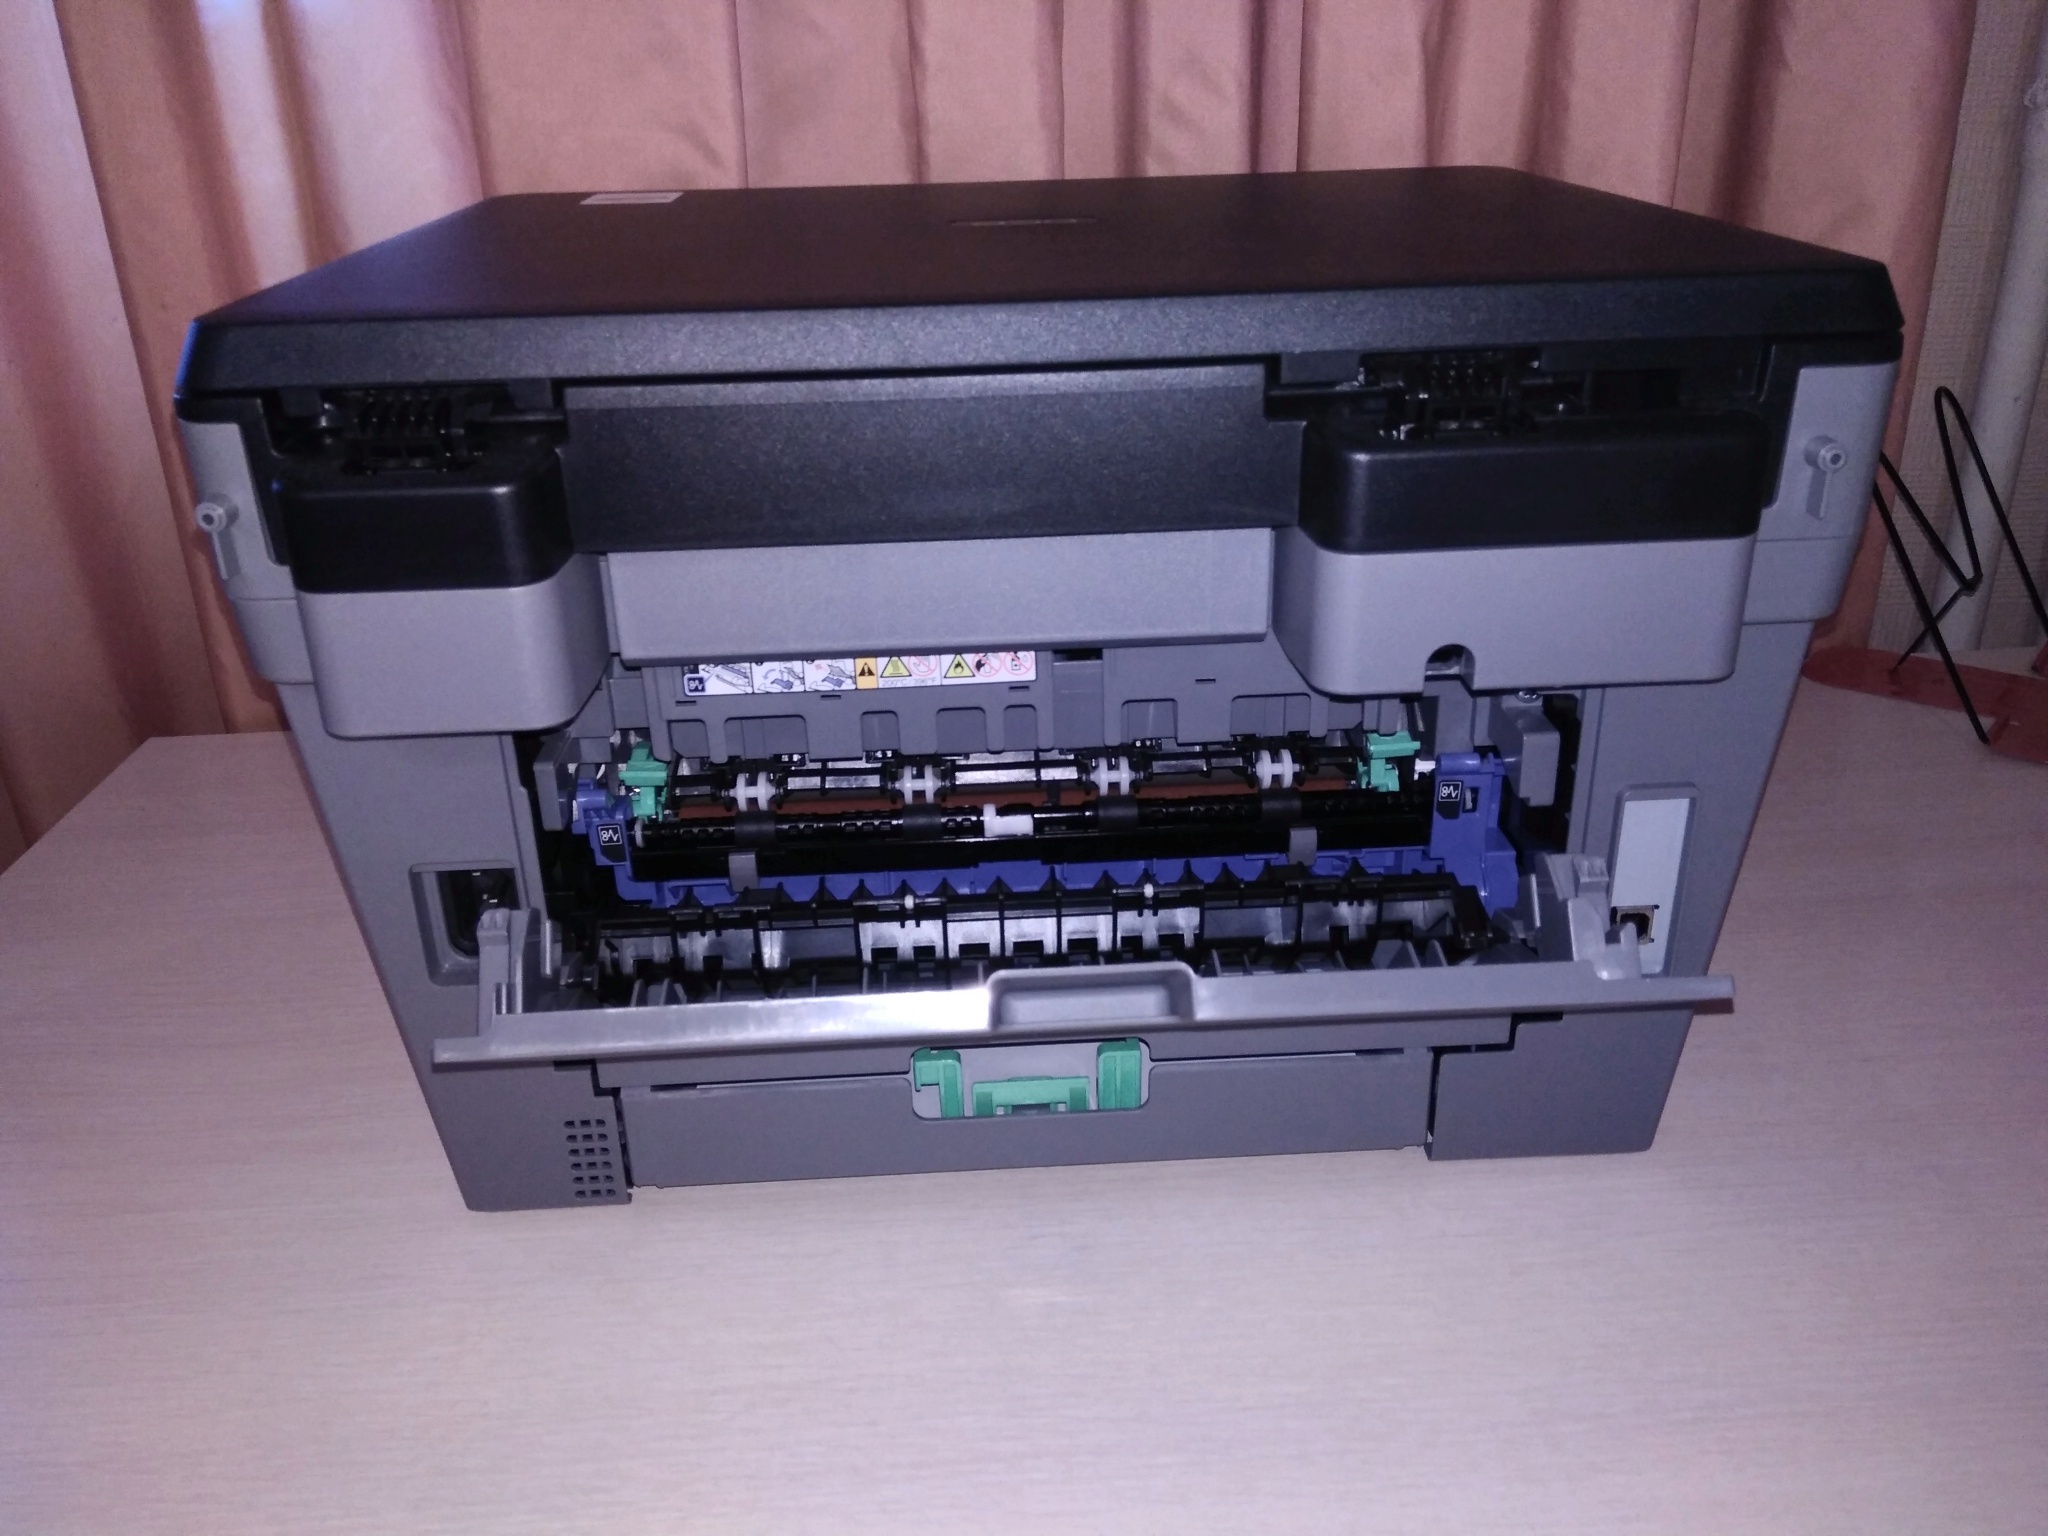 Brother dcp 2500dr. МФУ brother DCP-l2500dr. Принтер brother DCP l2500dr. Принтер бротхер DCP-l2500dr. Brother 2500.